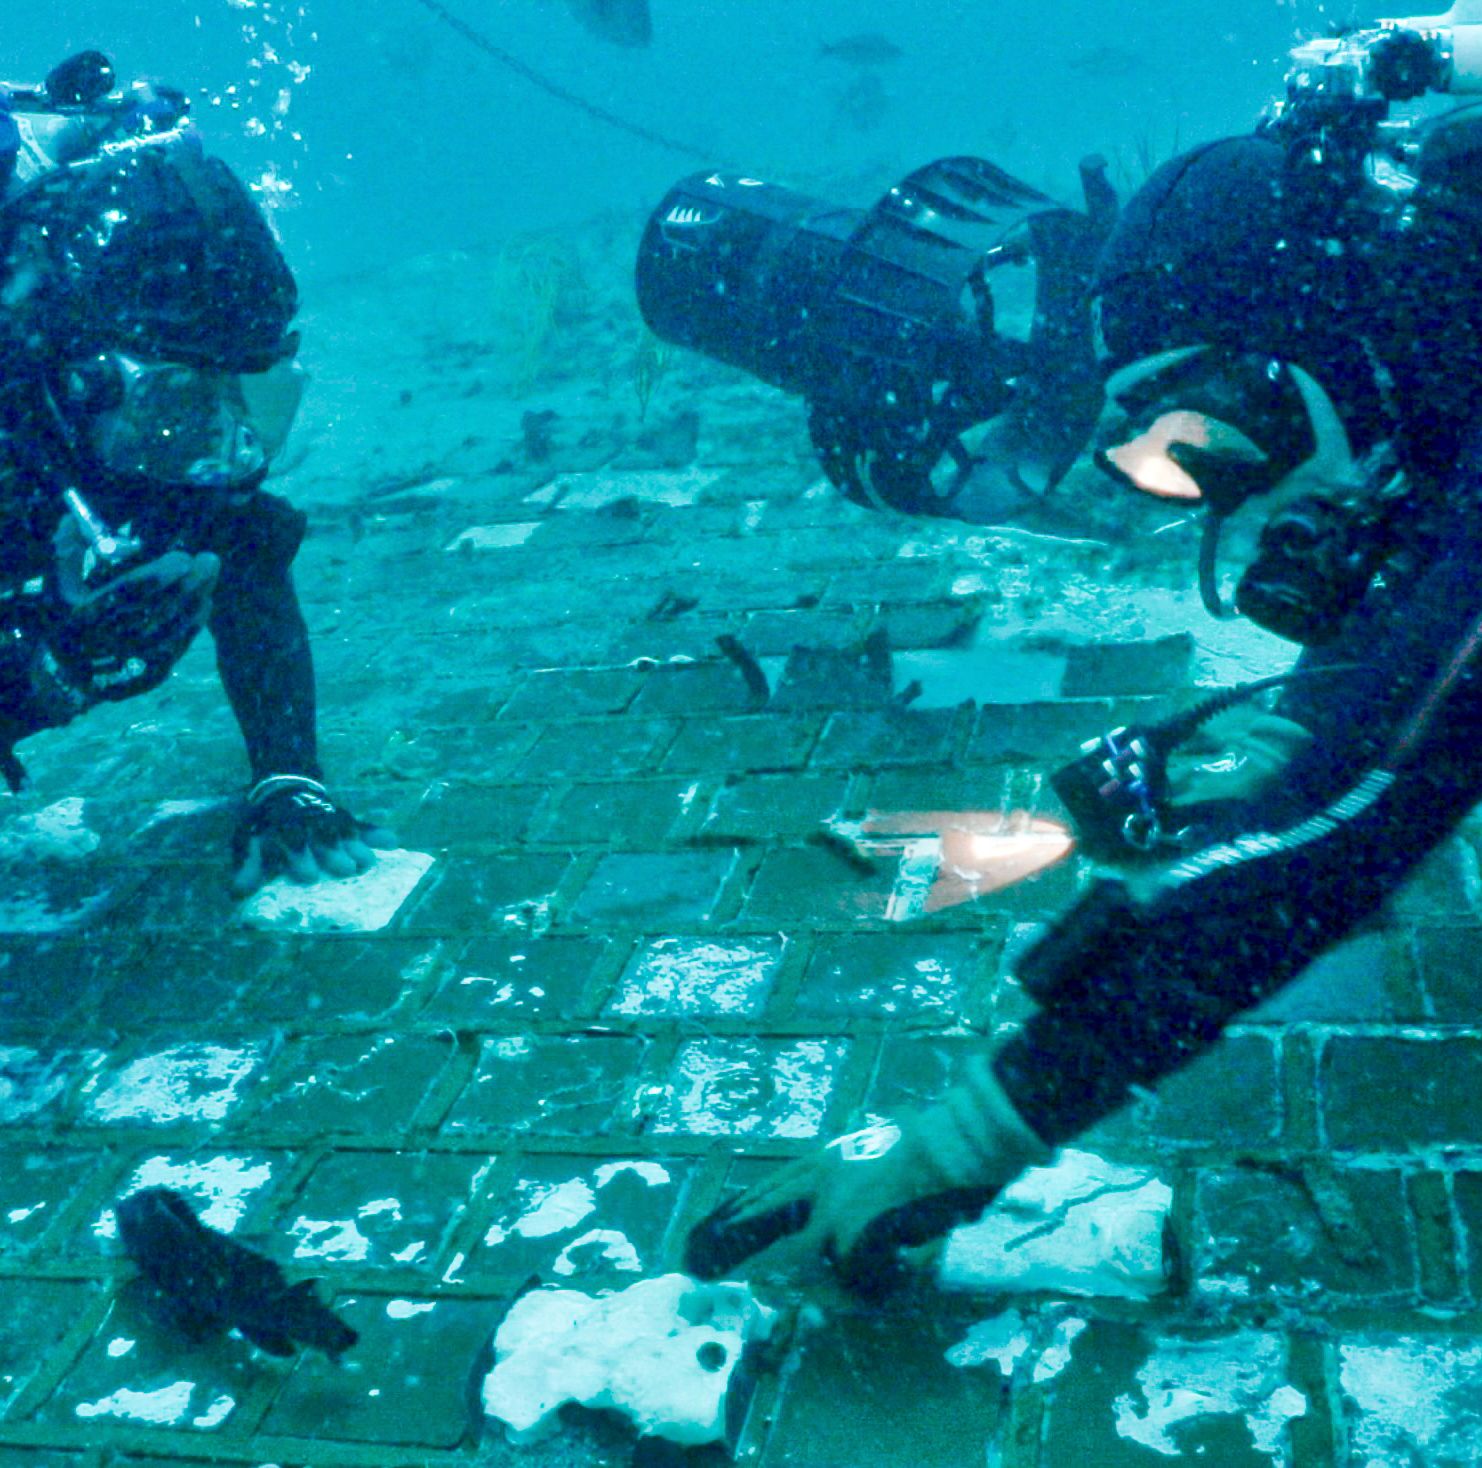 Divers Accidentally Found Space Shuttle Challenger Debris in the Bermuda Triangle